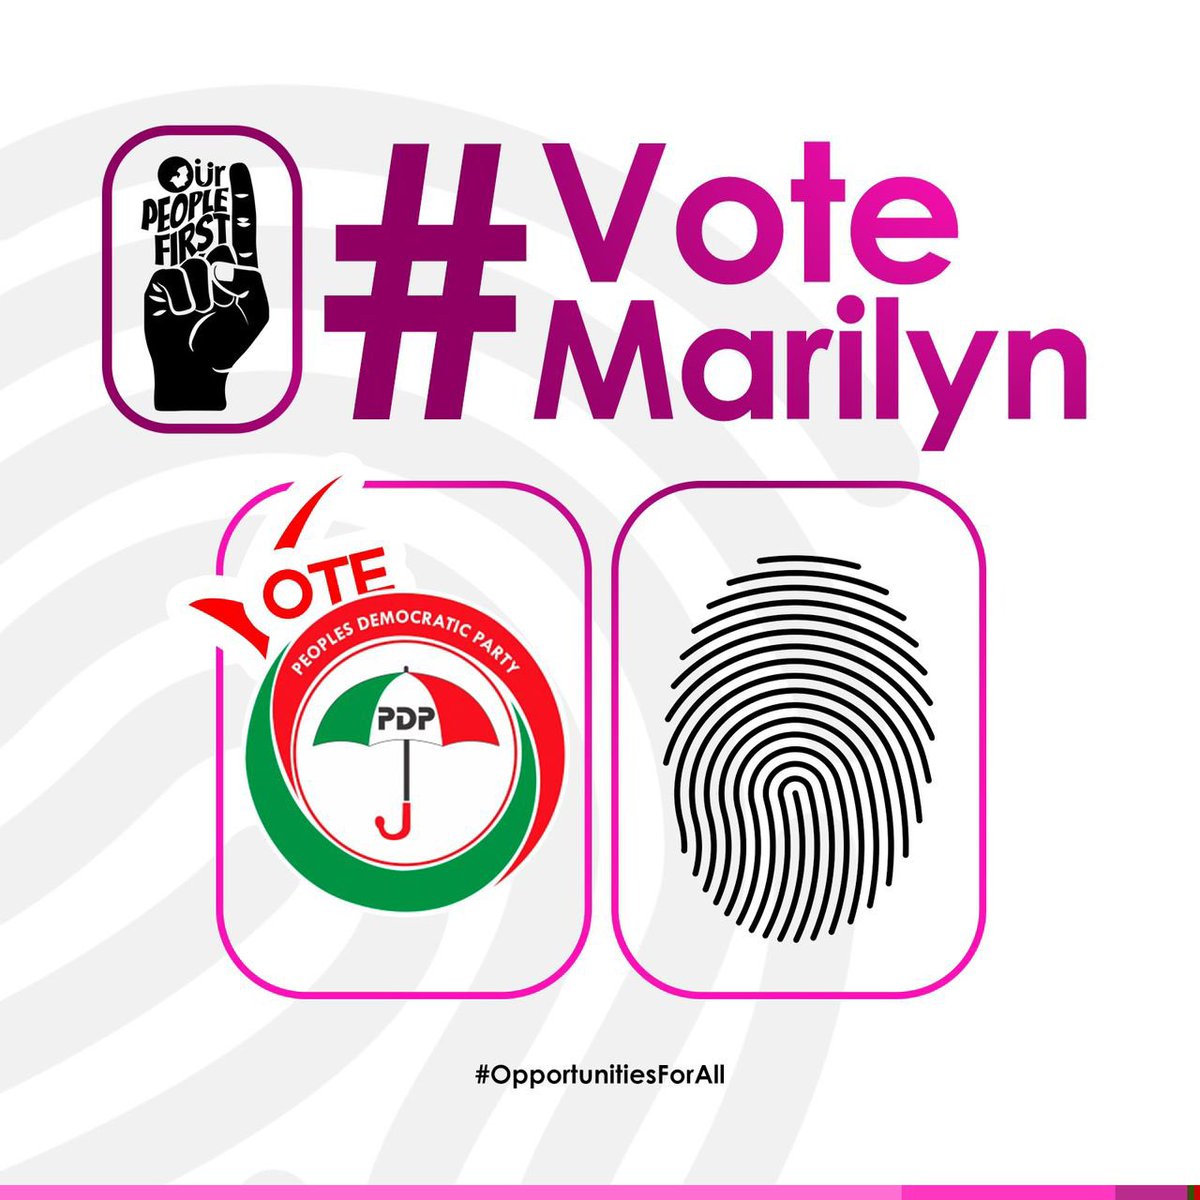 My people of Ika North East, as we come out to vote on Saturday, please remember that, by placing your fingerprint beside the umbrella, you’re putting #OurPeopleFirst and you’re also giving @OfficialPDPNig a chance to #AdvanceDelta.
 
Ika Rinma! Orinieyinle!!
 
#PowerToThePeople